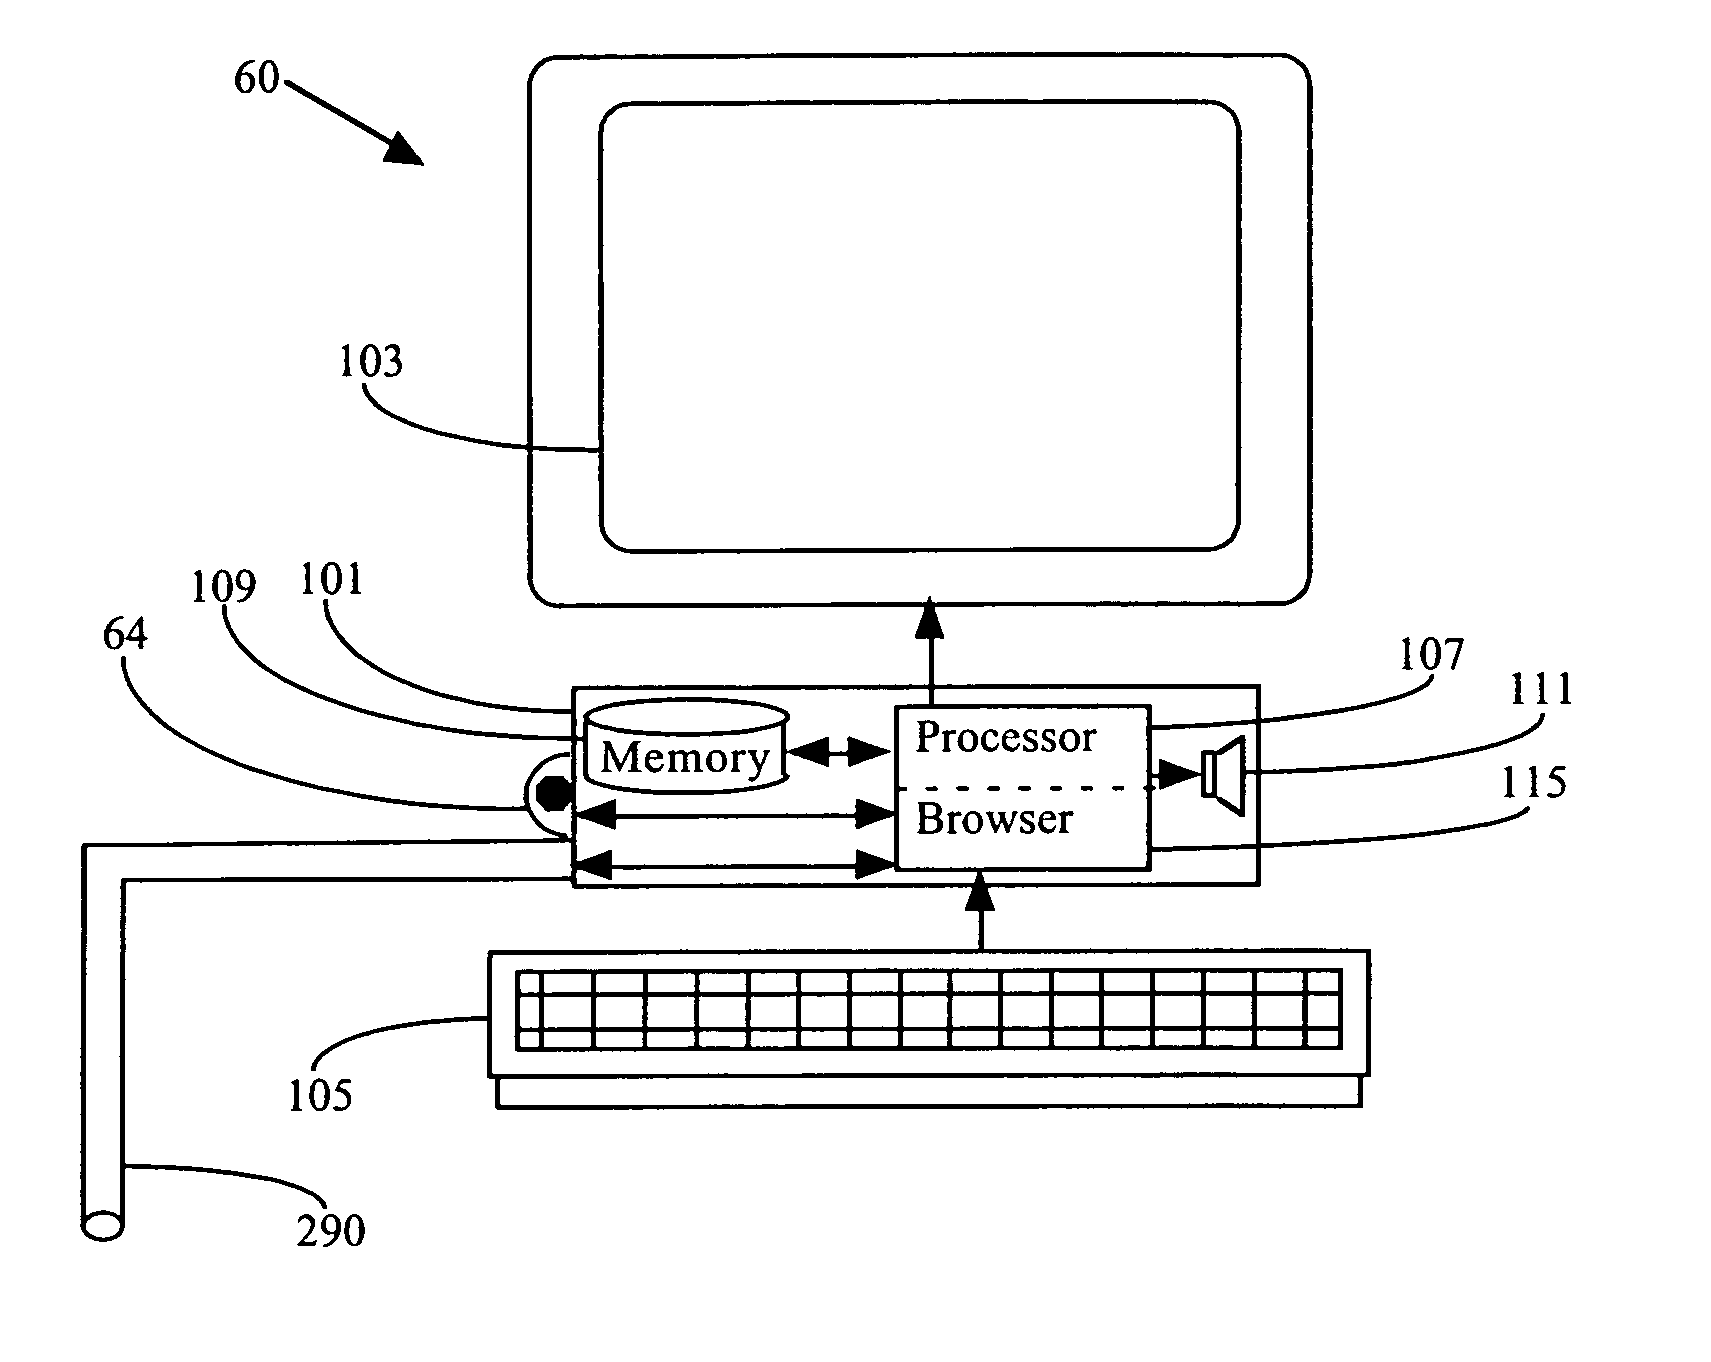 System and method to authenticate users to computer systems